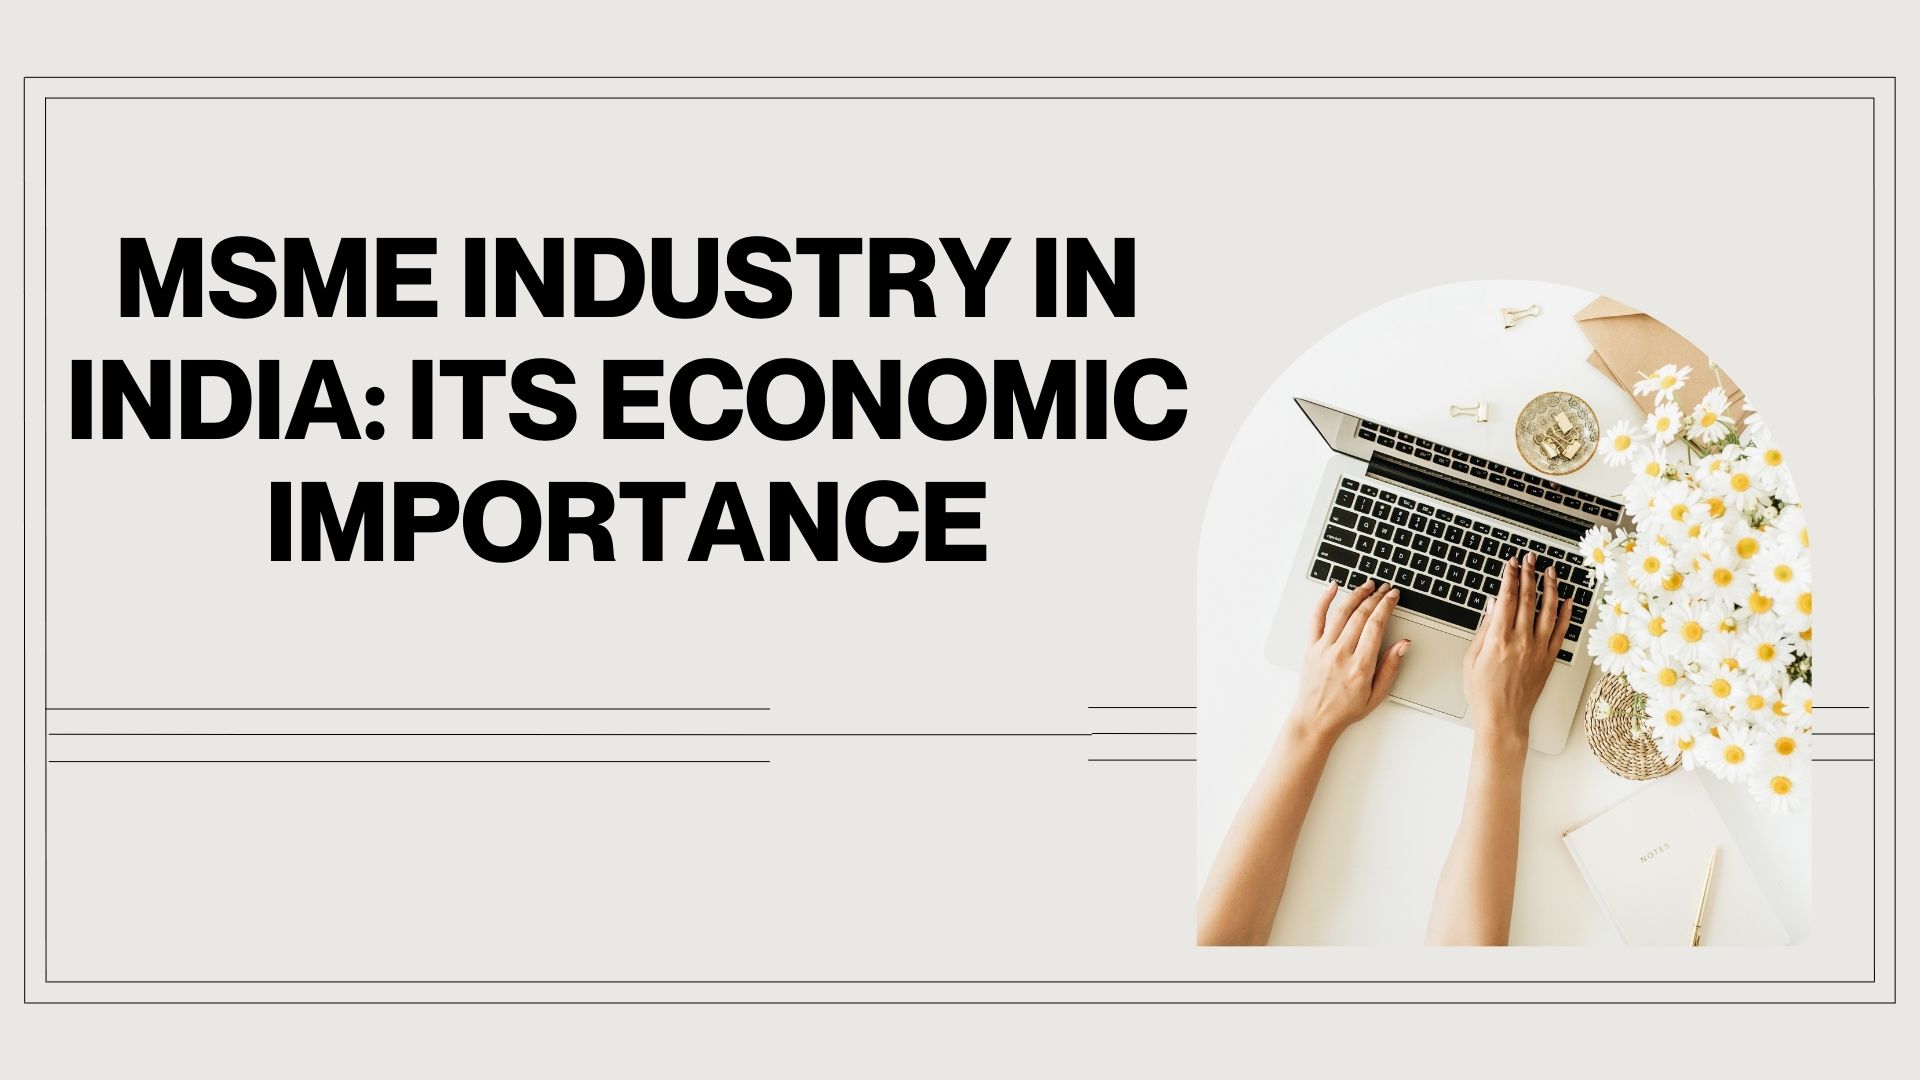 MSME Industry in India Its Economic Importance